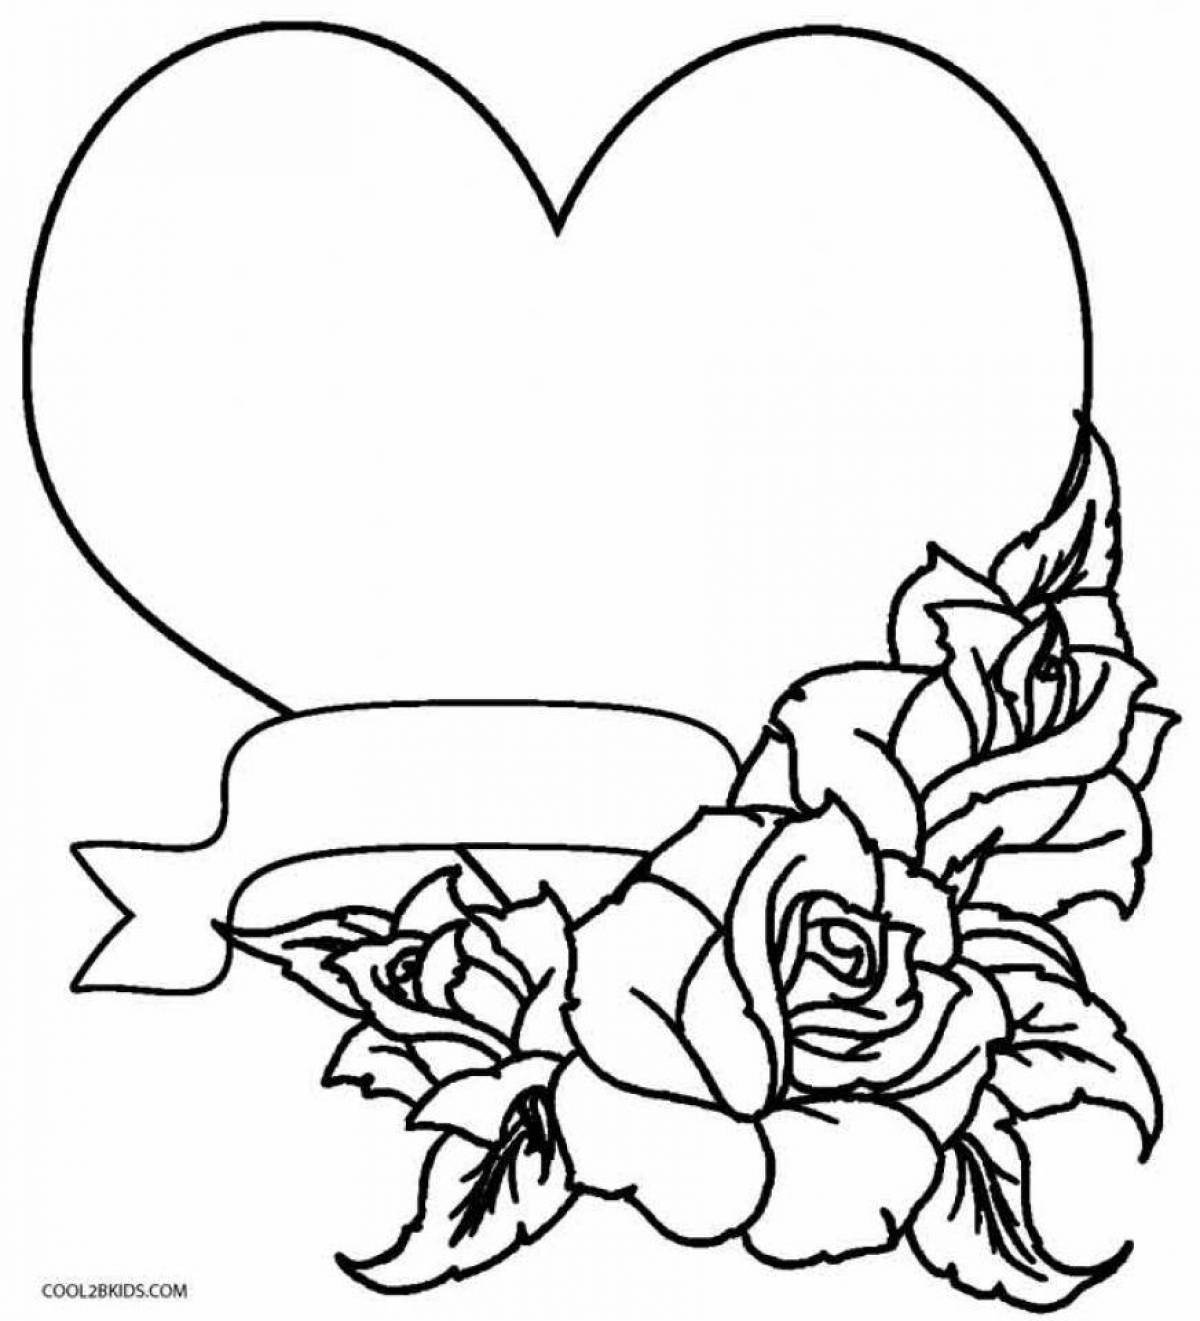 Amazing card heart coloring page